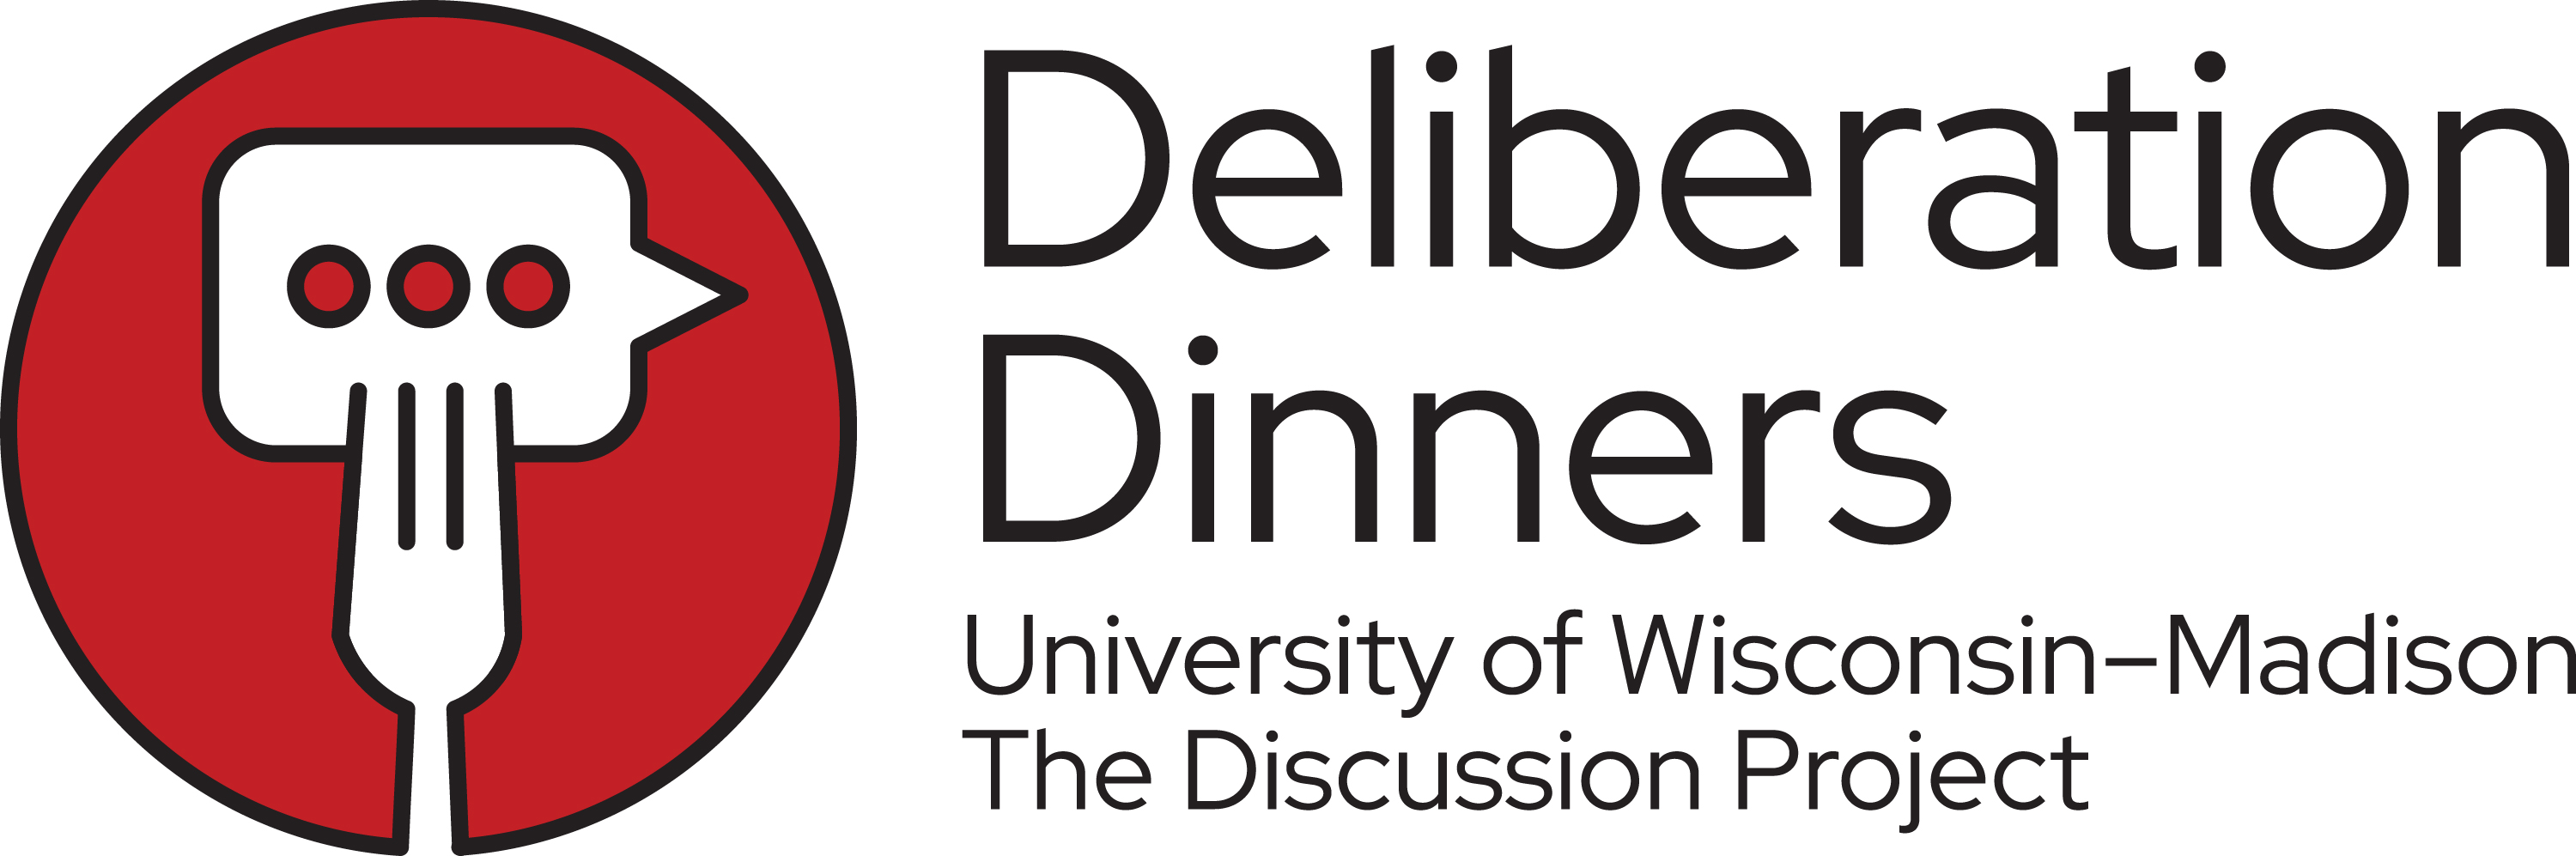 Deliberation Dinners